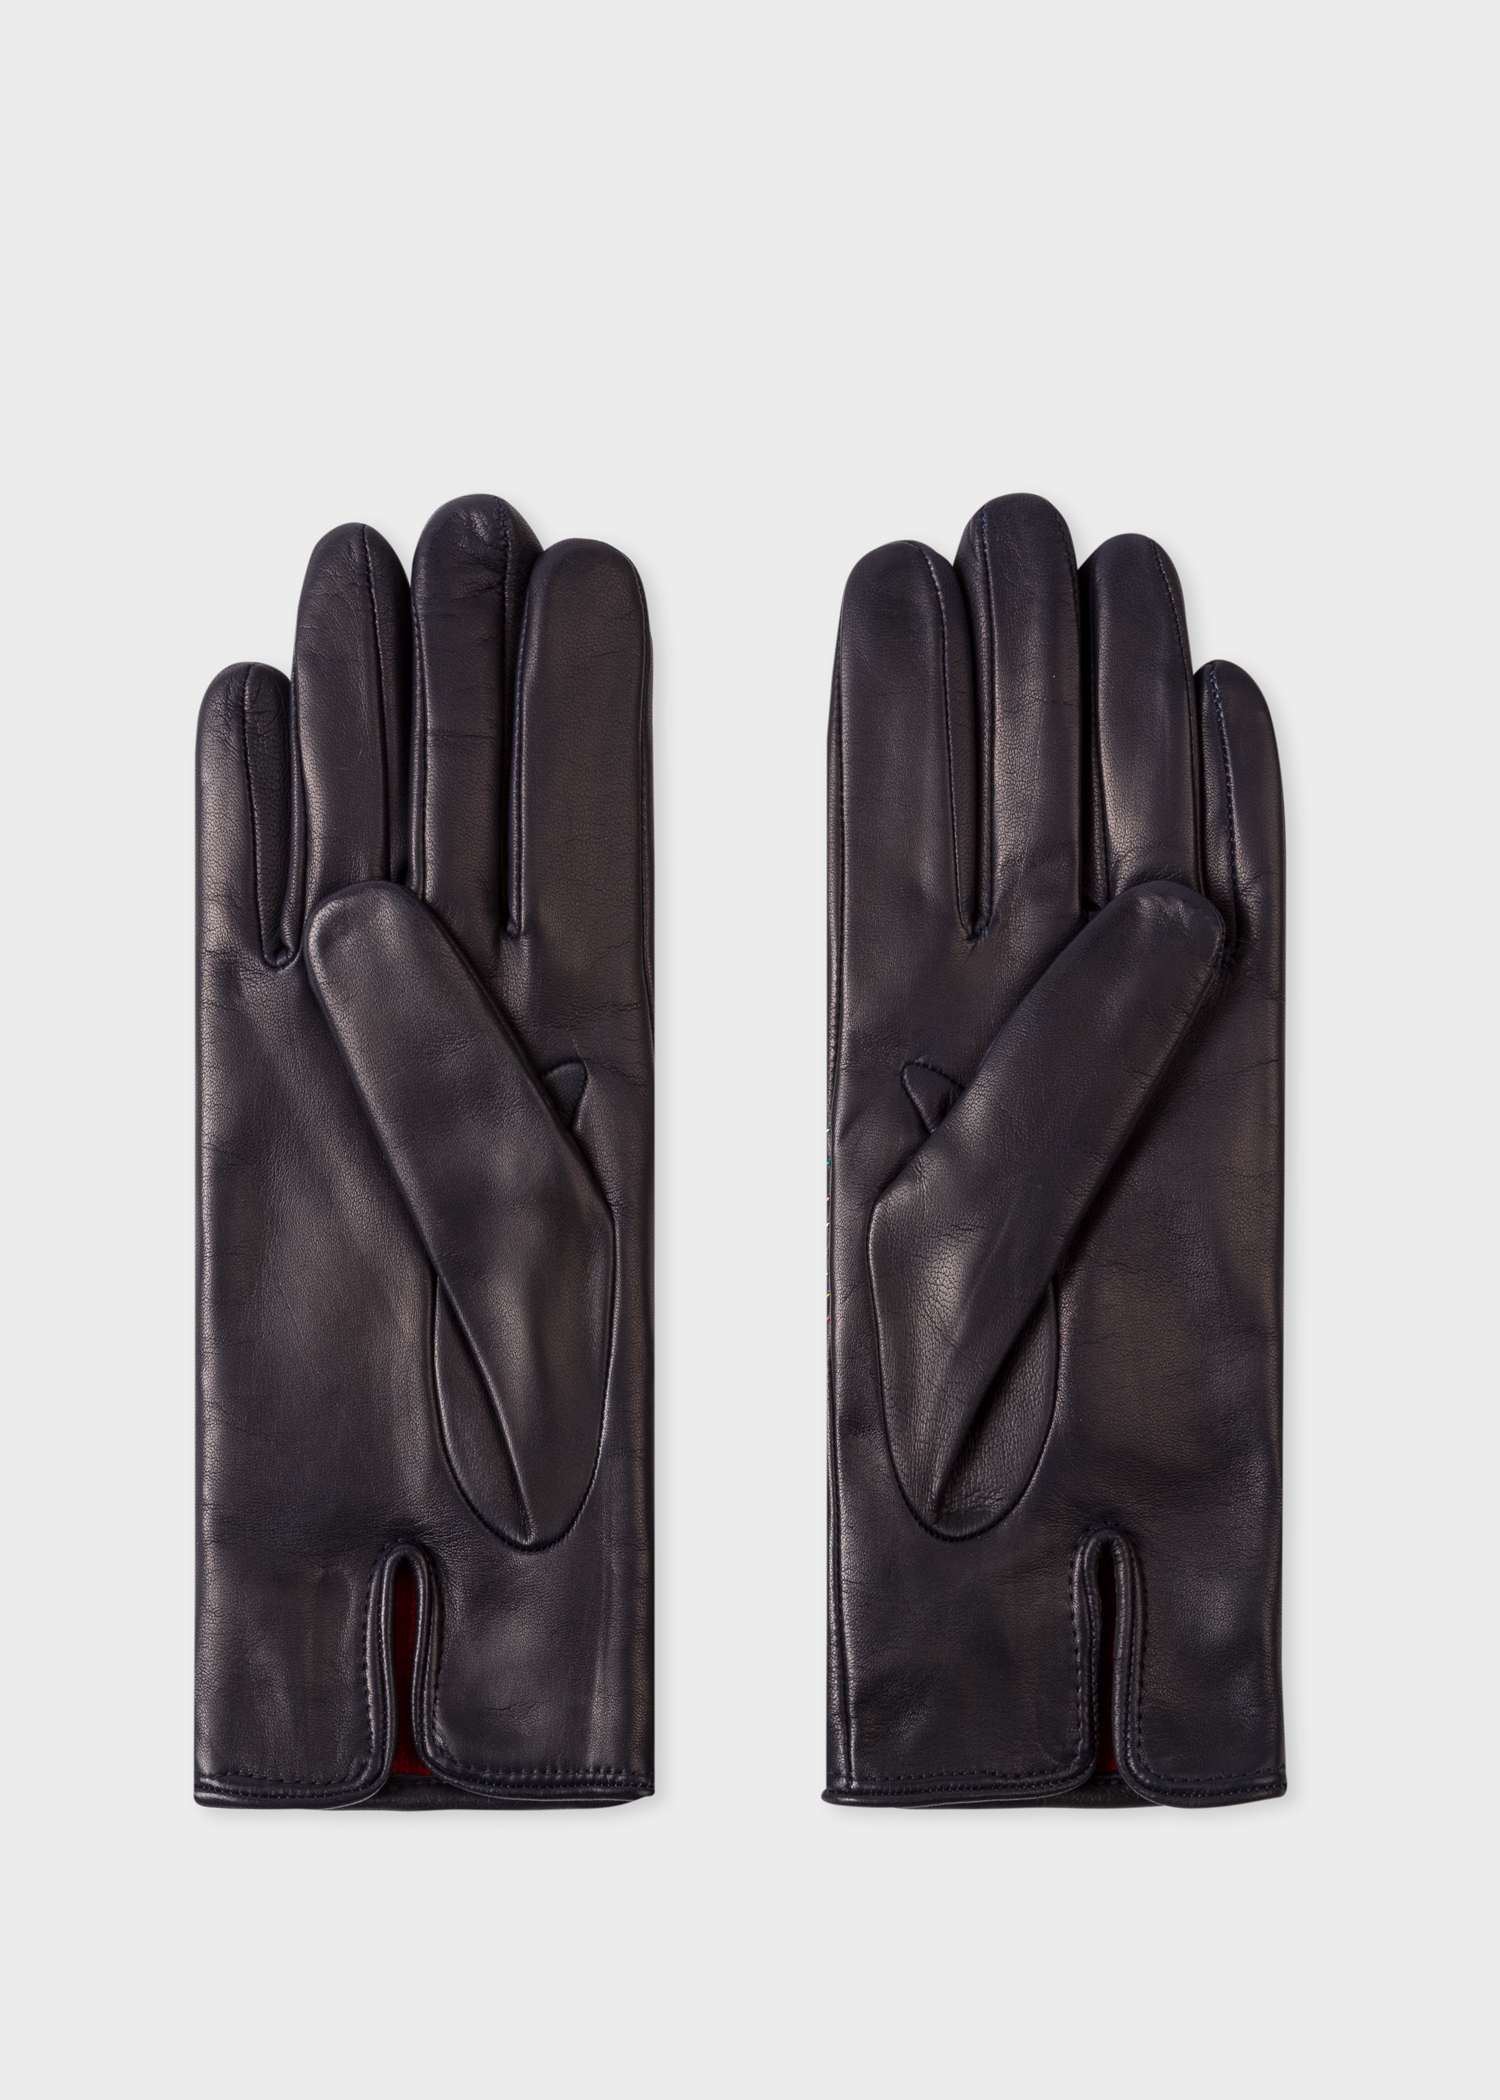 Inside view - Women's Navy Leather Gloves With 'Swirl' Stitching Details Paul Smith